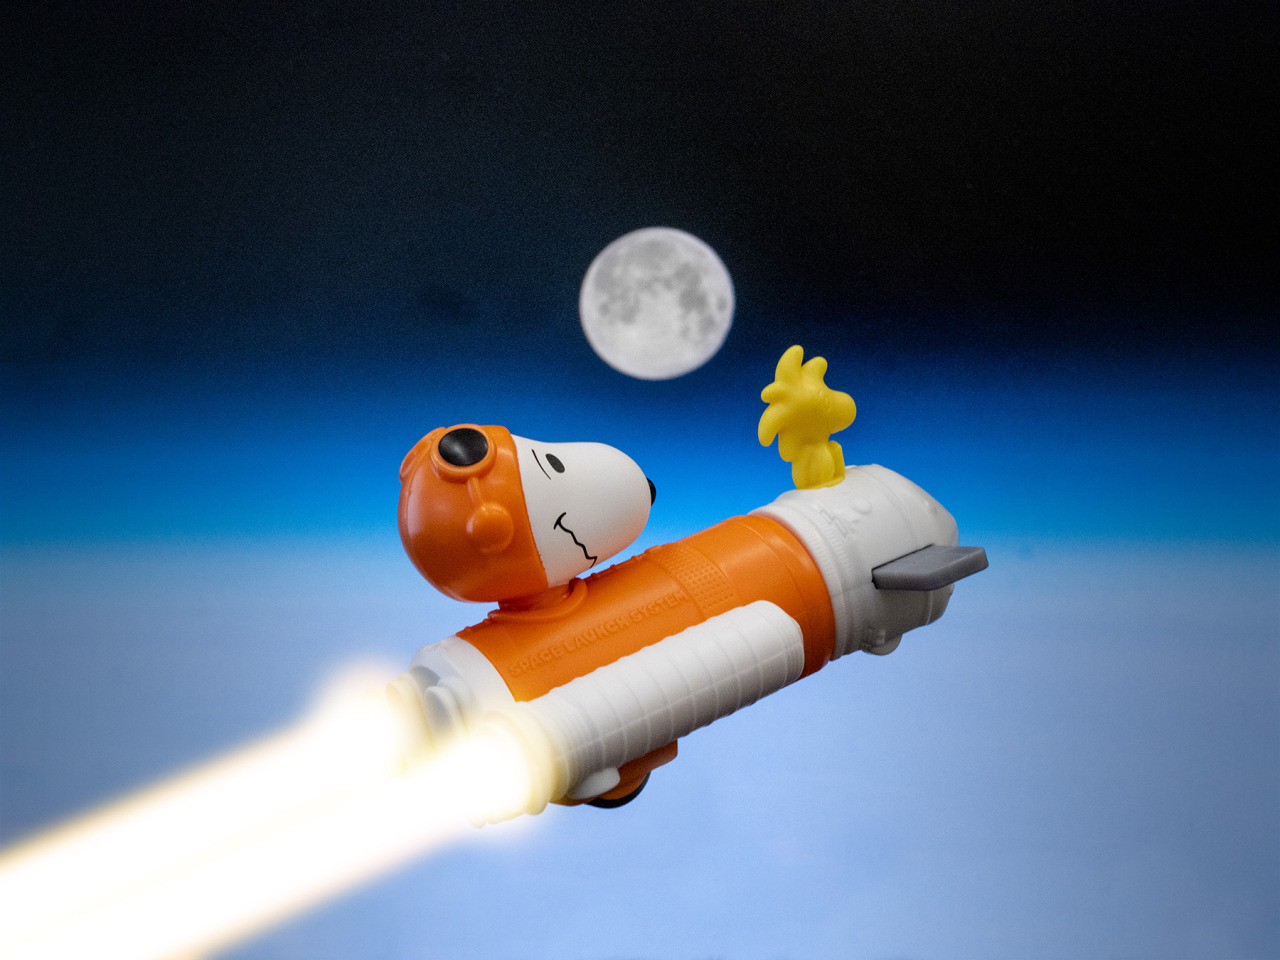 nasaorion:
“ Zoom to the Moon! Astronauts will blast off to the Moon in the Orion spacecraft with NASA’s Space Launch System, the world’s most powerful rocket ever built. Help #AstronautSnoopy launch into deep space, farther than any human or bird...